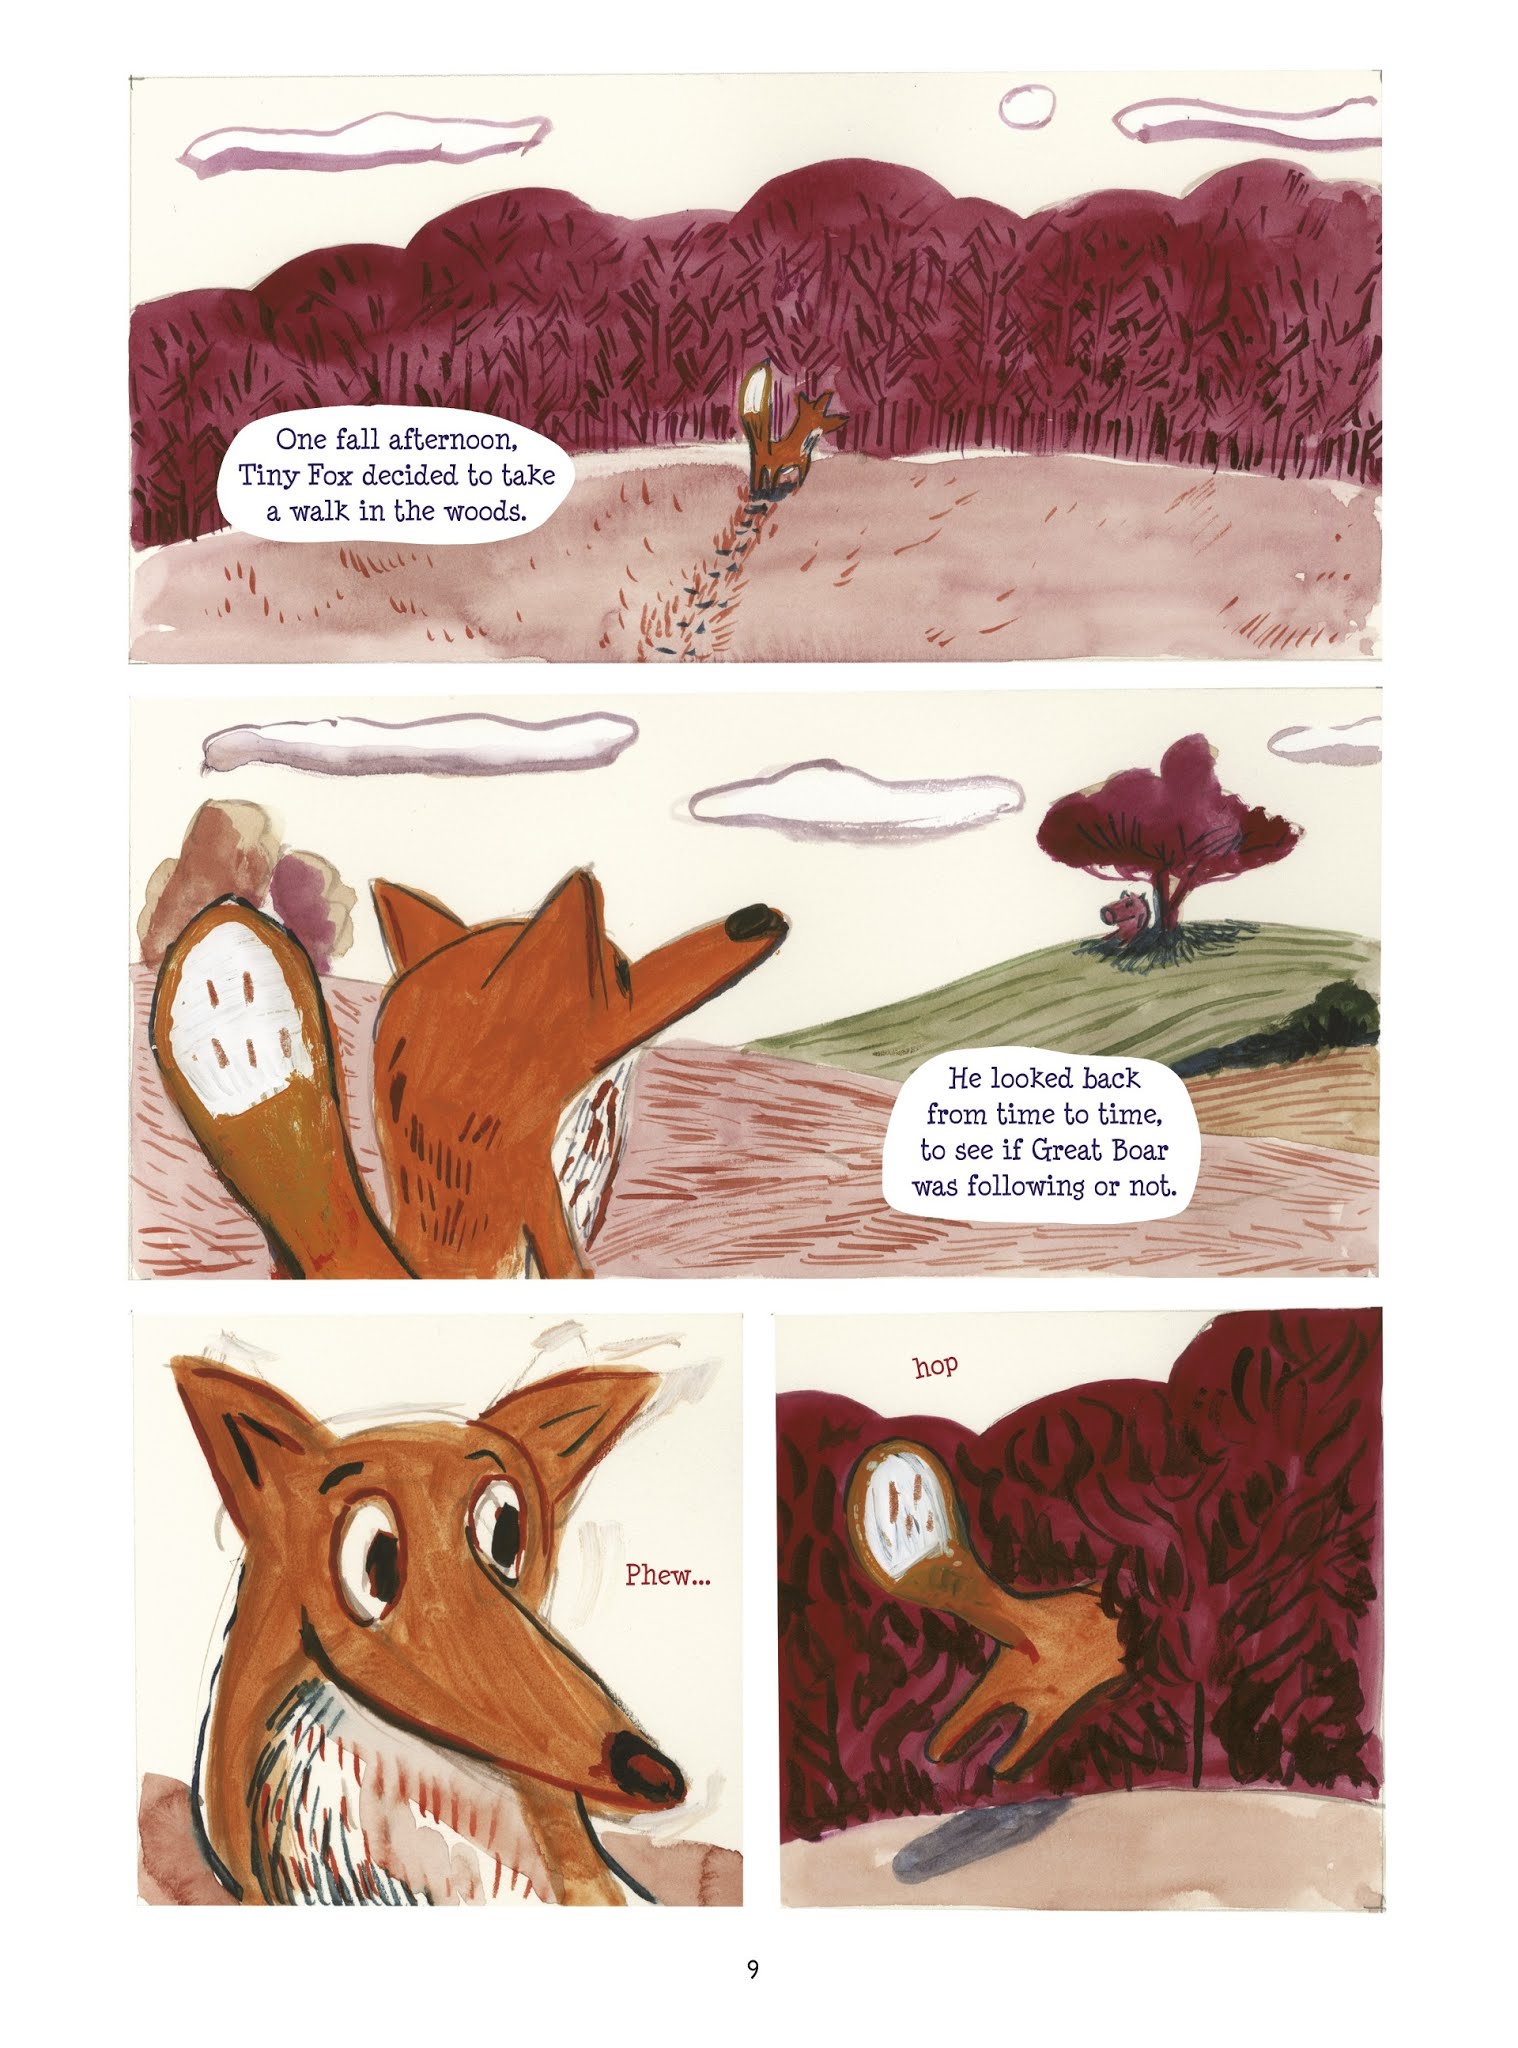 Read online Tiny Fox and Great Boar comic -  Issue #1 - 10